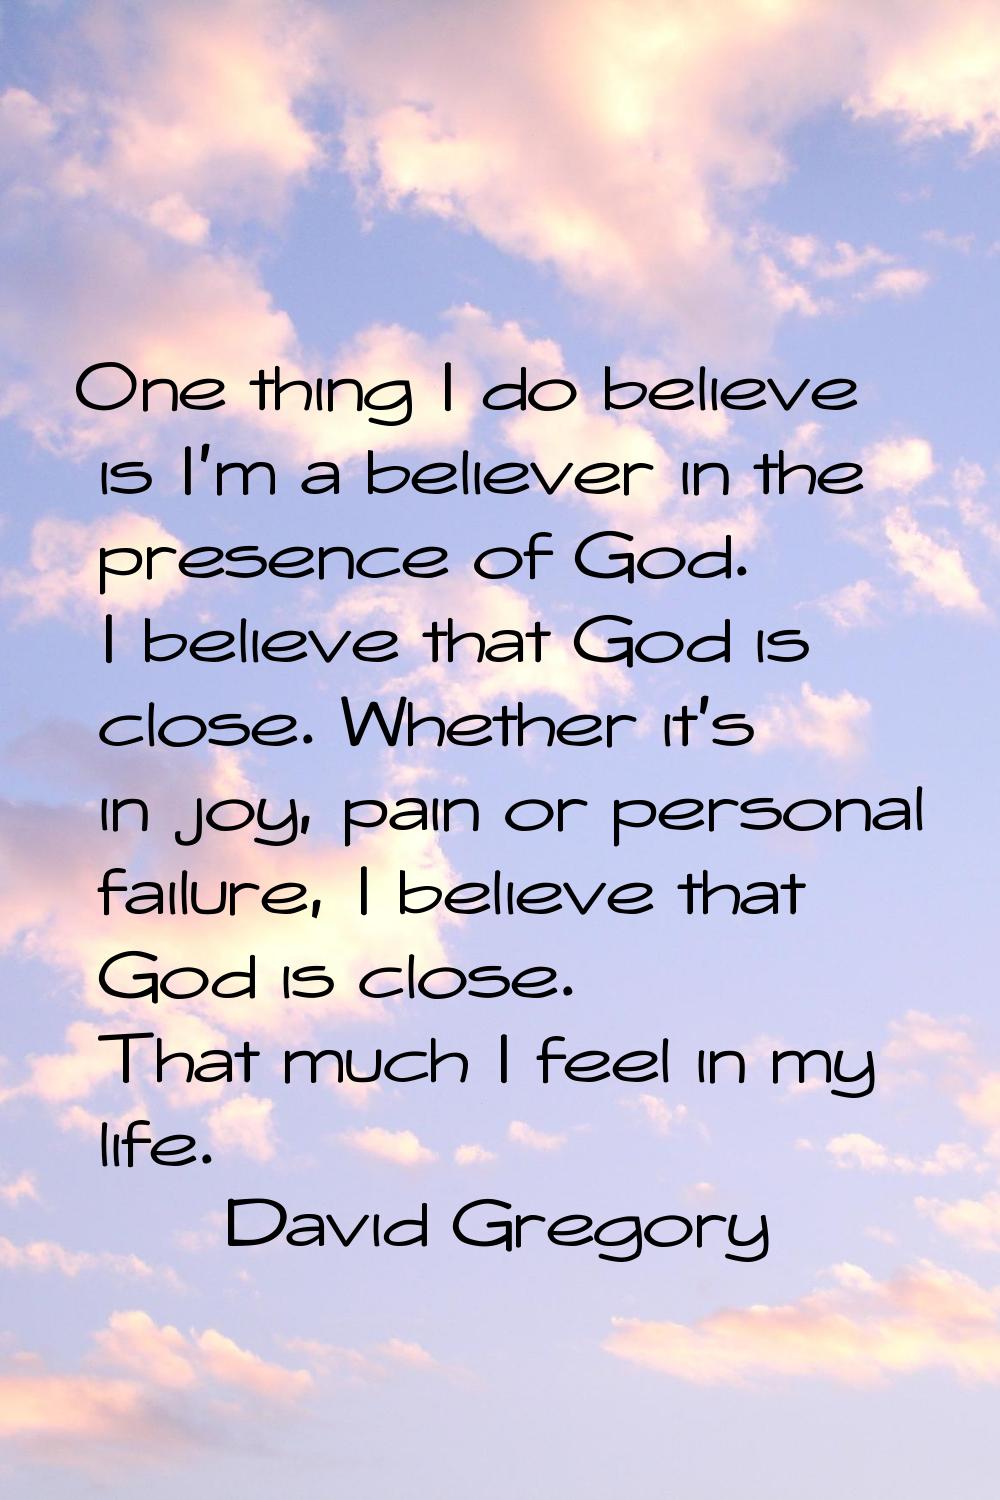 One thing I do believe is I'm a believer in the presence of God. I believe that God is close. Wheth